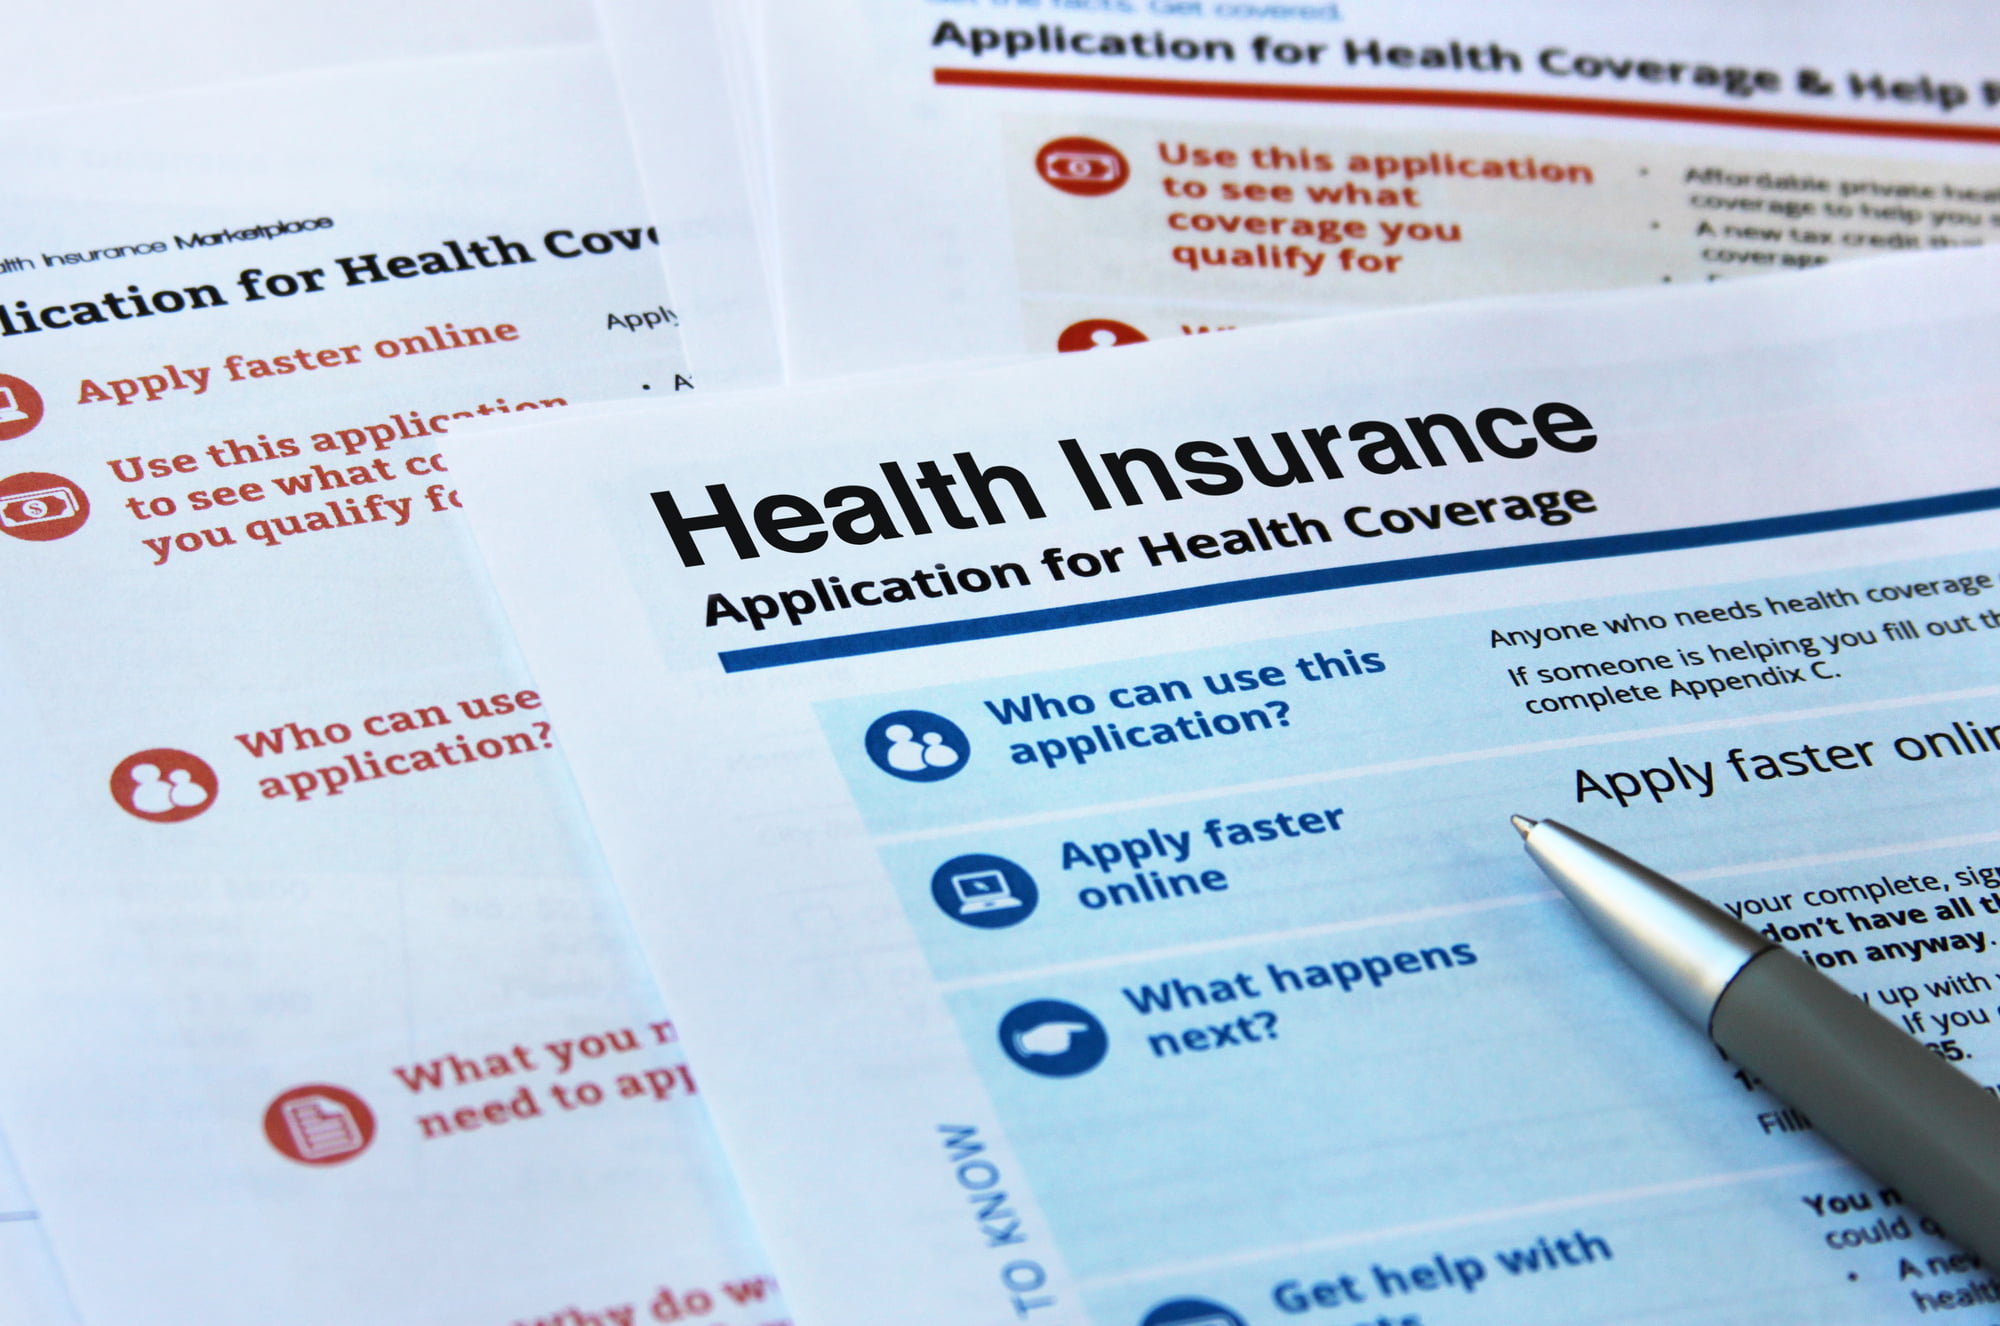 Finding the right health insurance policy requires knowing what not to do. Here are common mistakes with shopping for health insurance and how to avoid them.